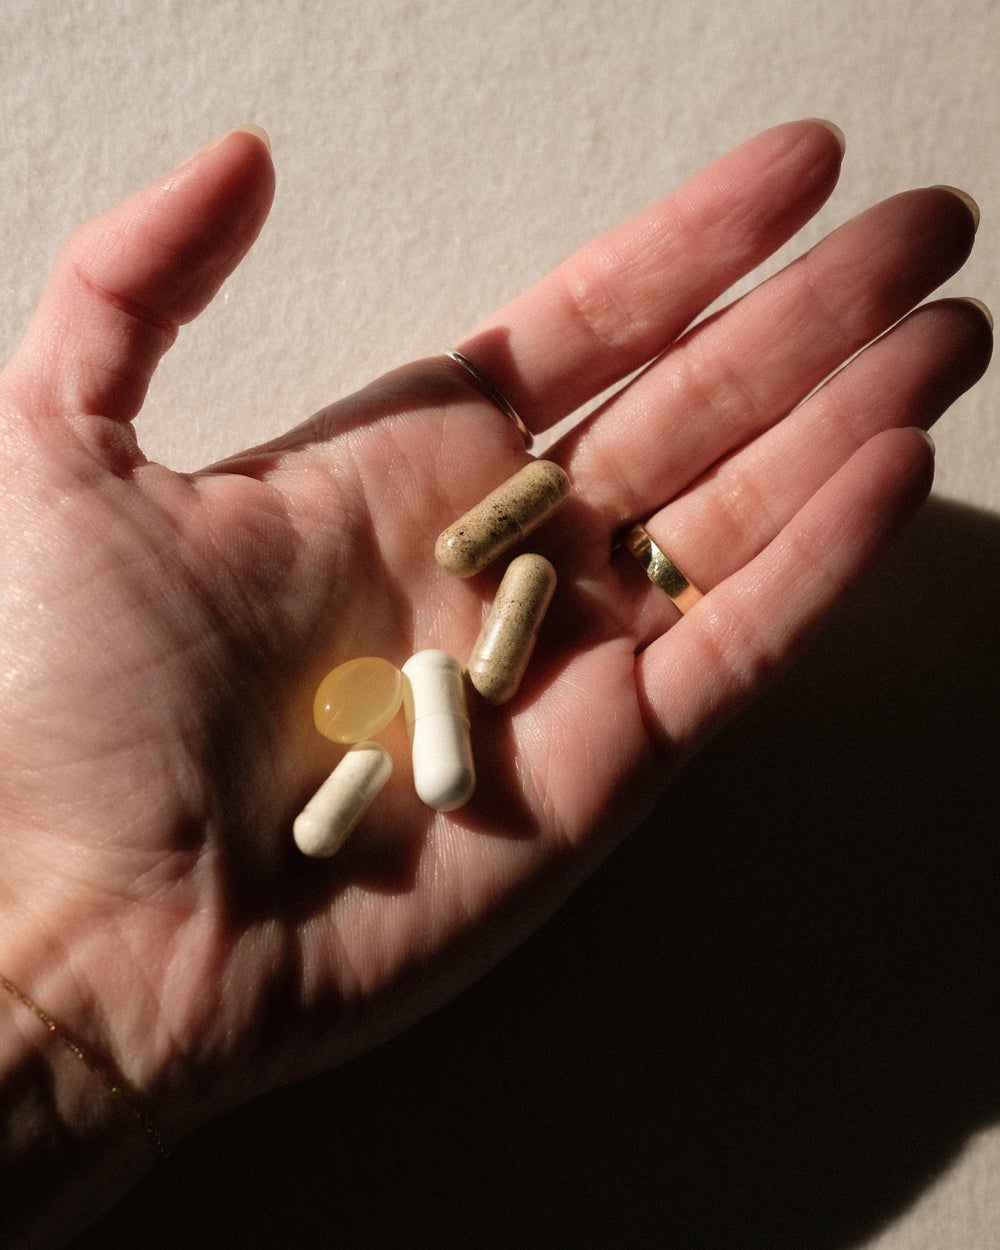 Standards Matter: How to Know That Your Vitamins Are Safe and Effective